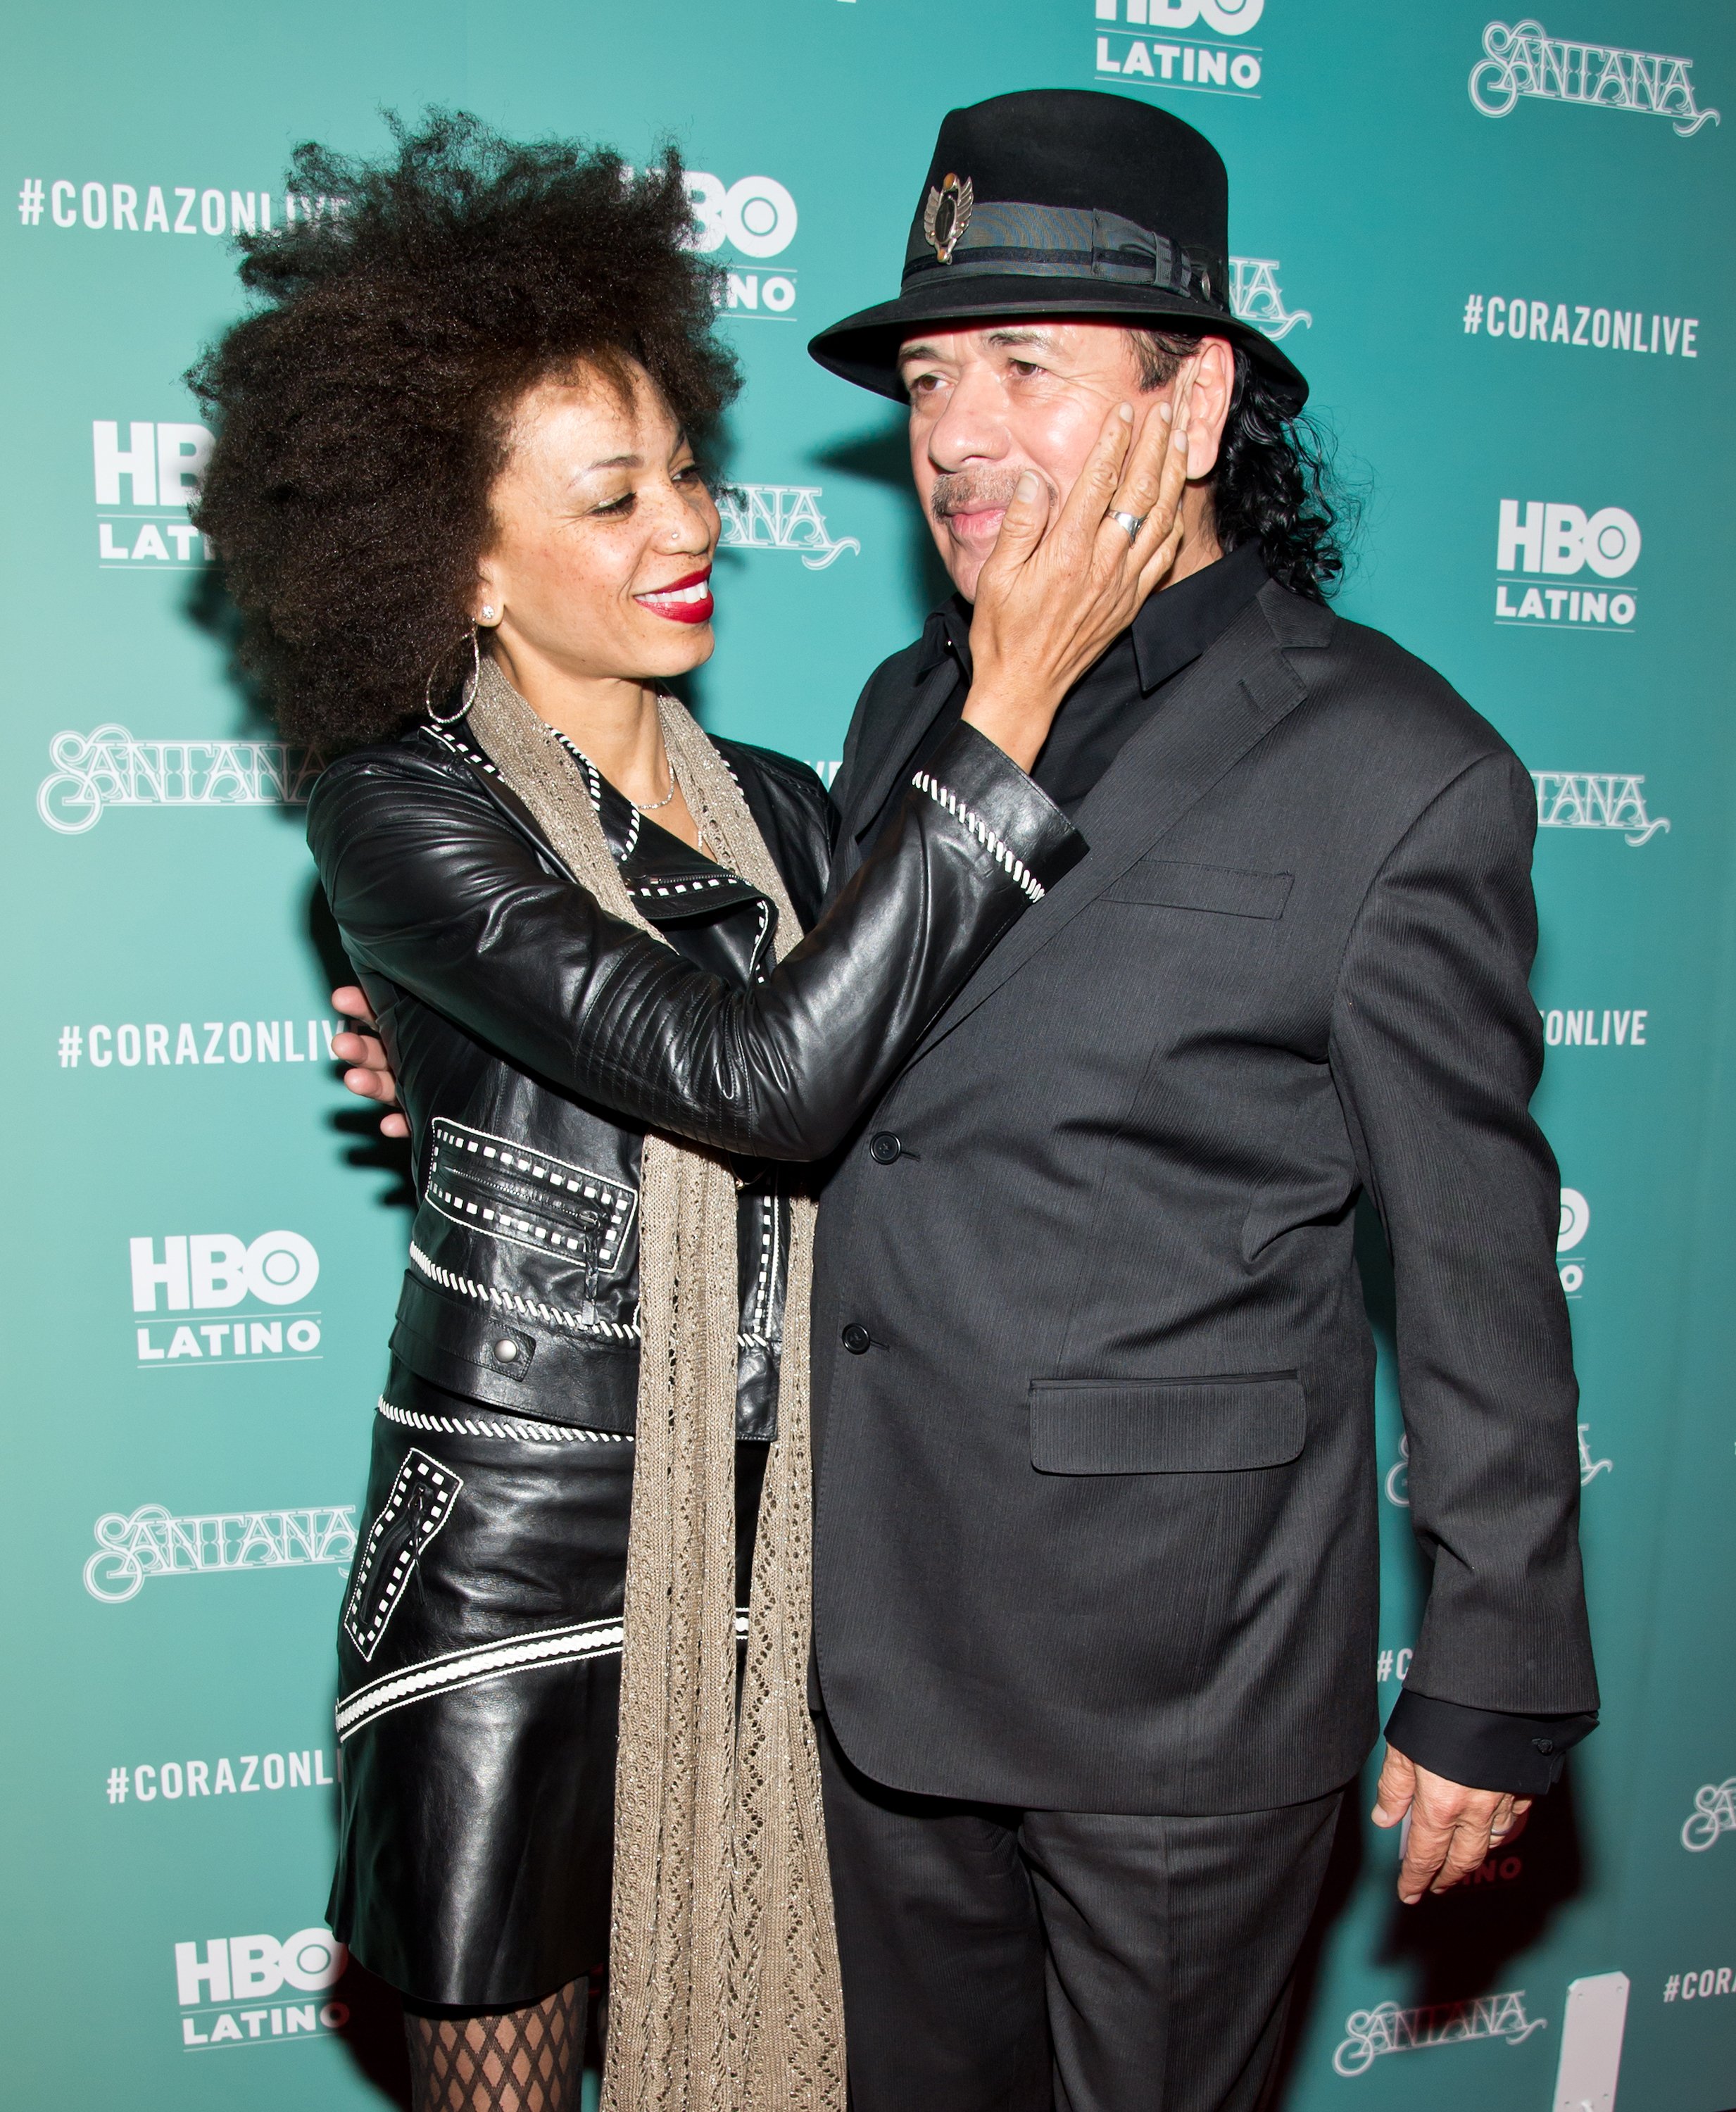 Carlos Santana and Cindy Blackman in New York 2014. | Source: Getty Images